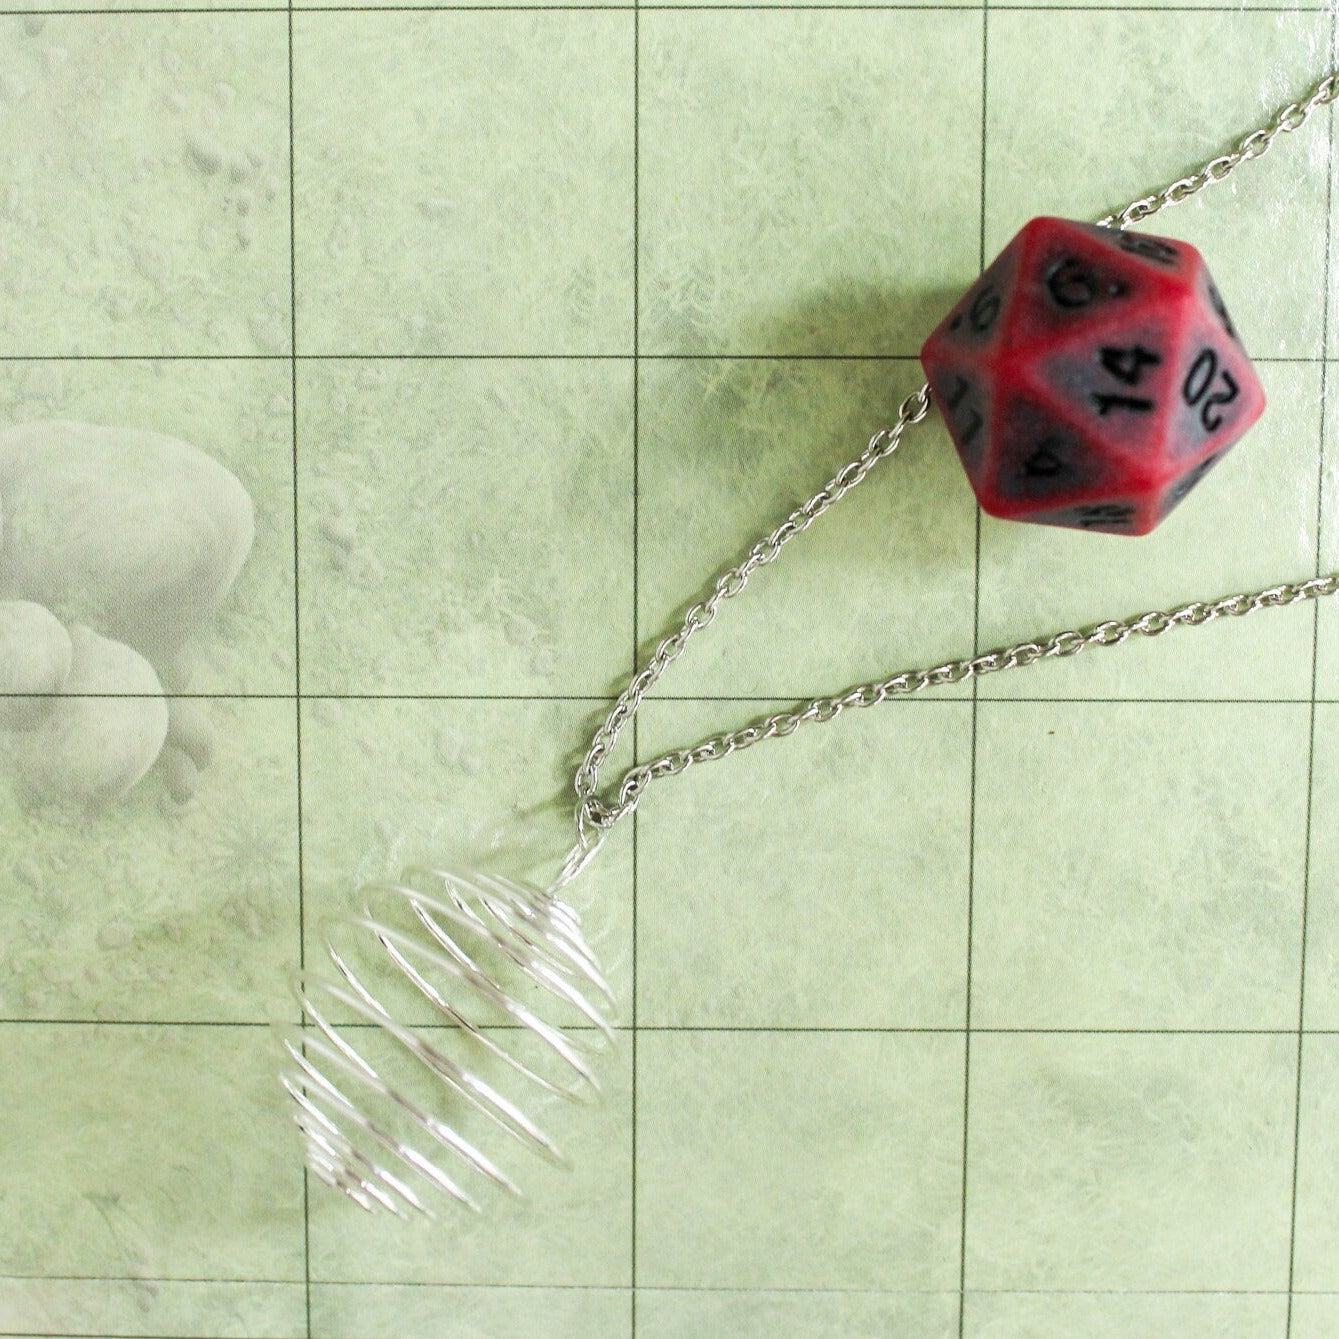 D&D D20 Spiral Dice Necklace - Removable Full Size D20 Many Dice RPG Fantasy Gift DND